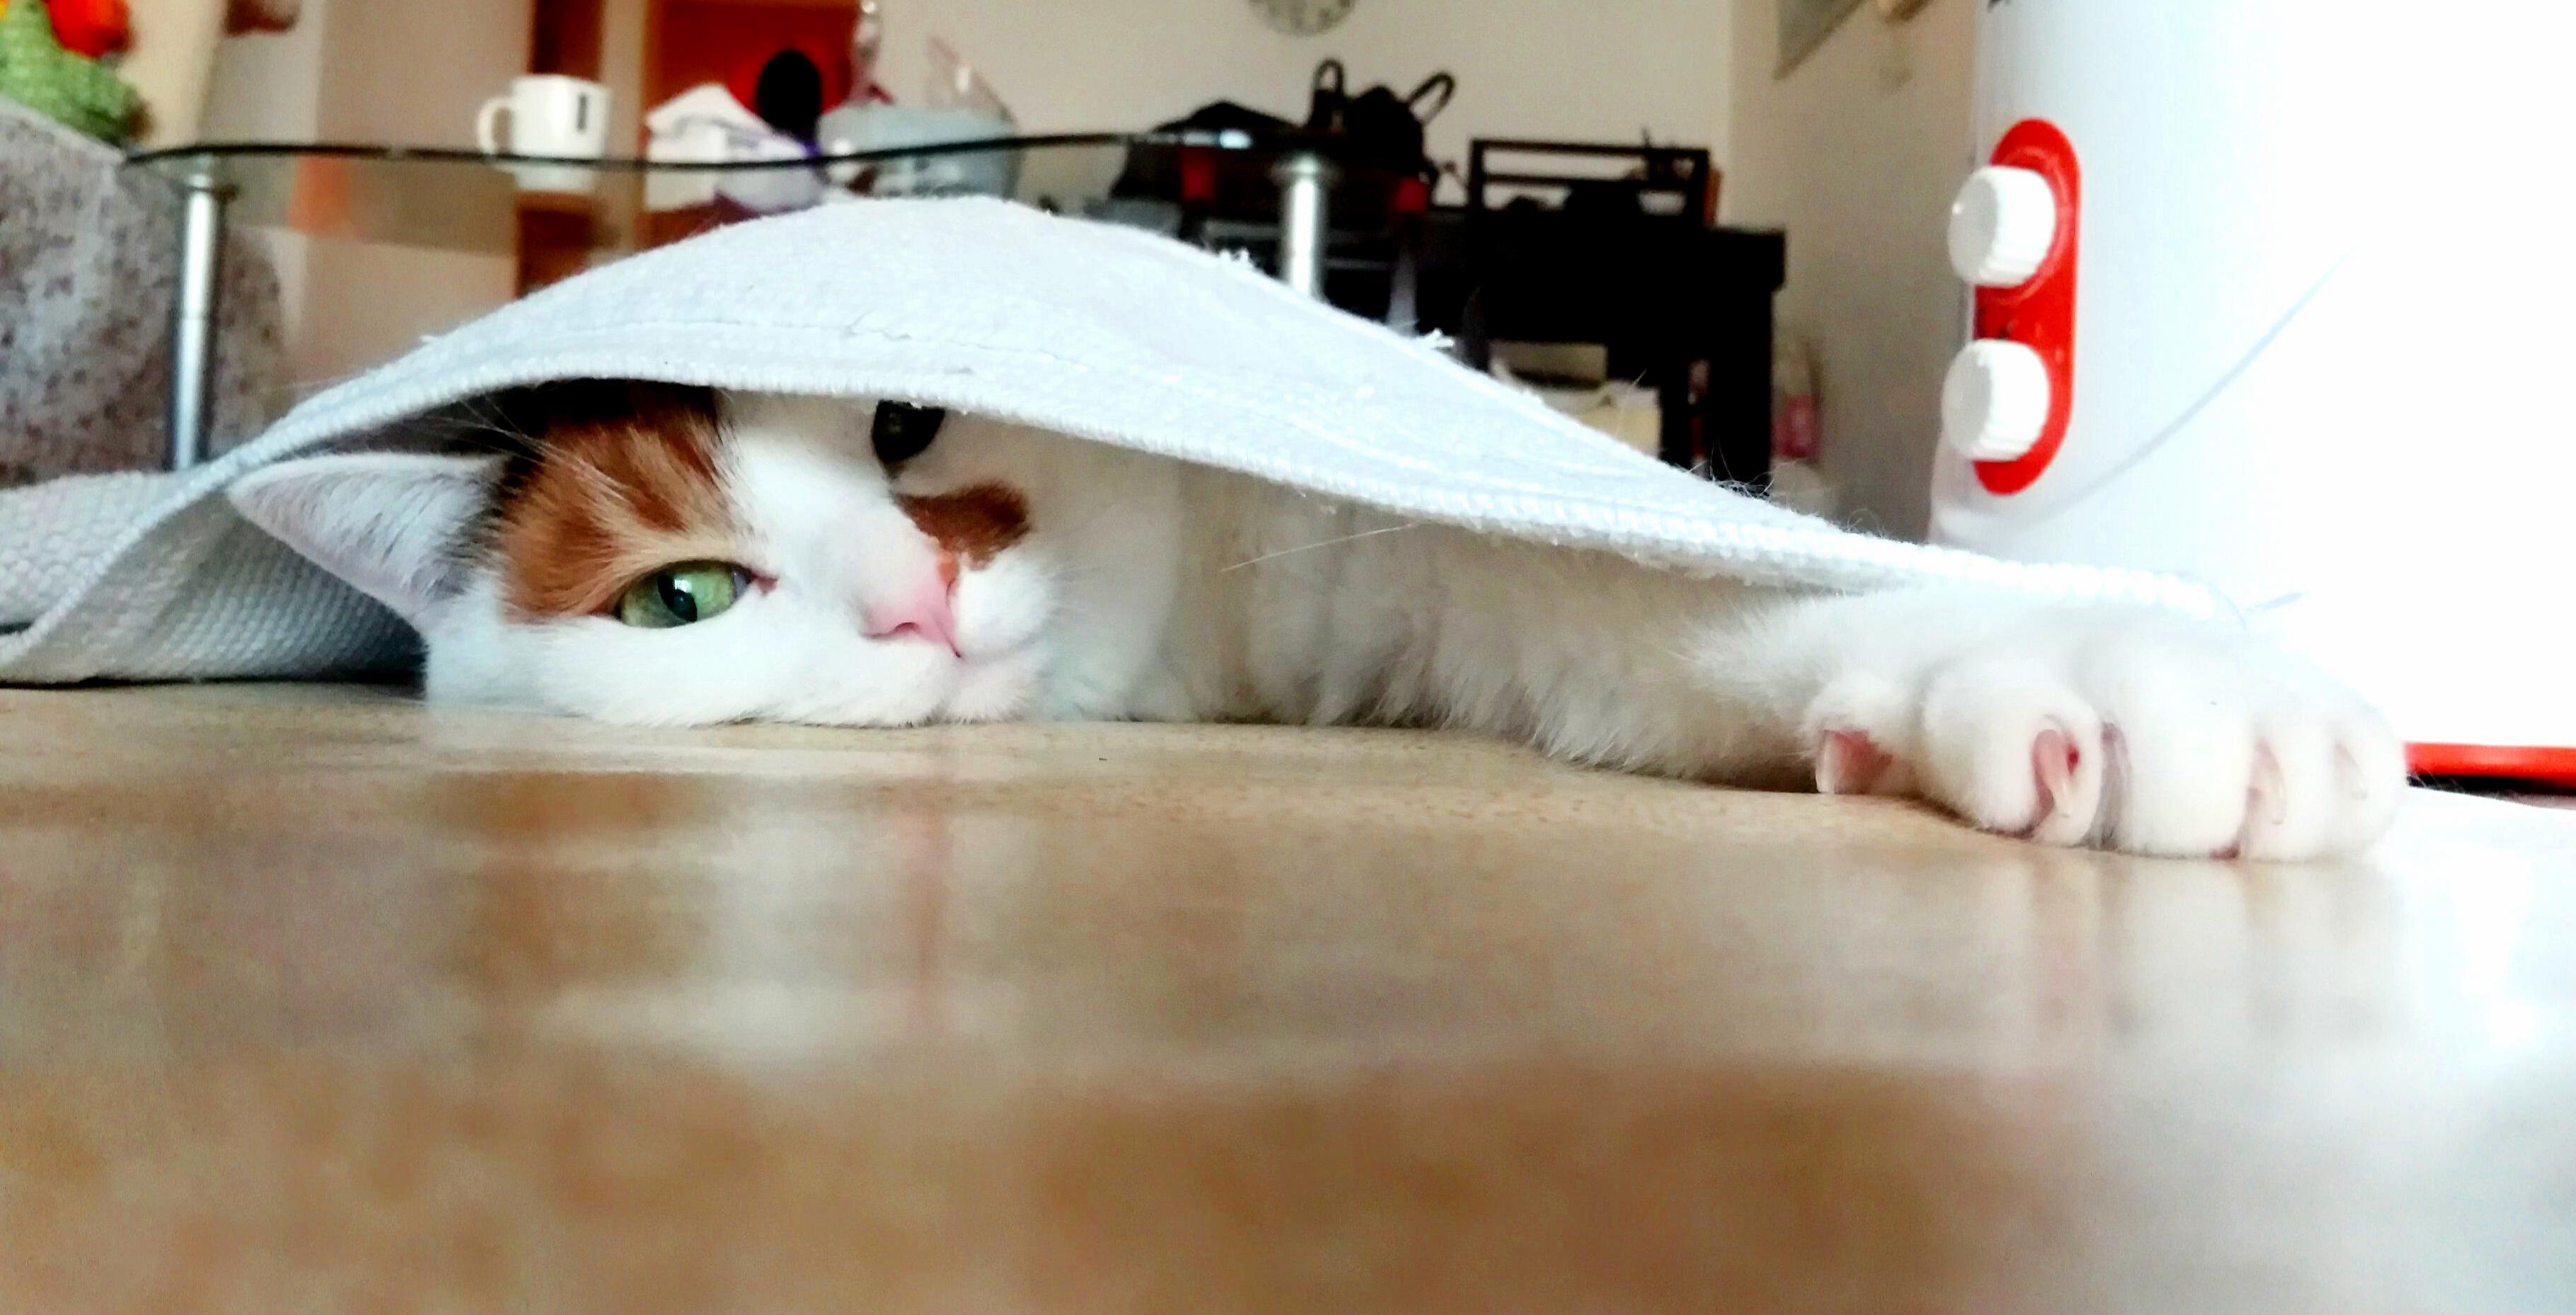 Cat sitting this madam, she loves laying on the heated floor under the rug.